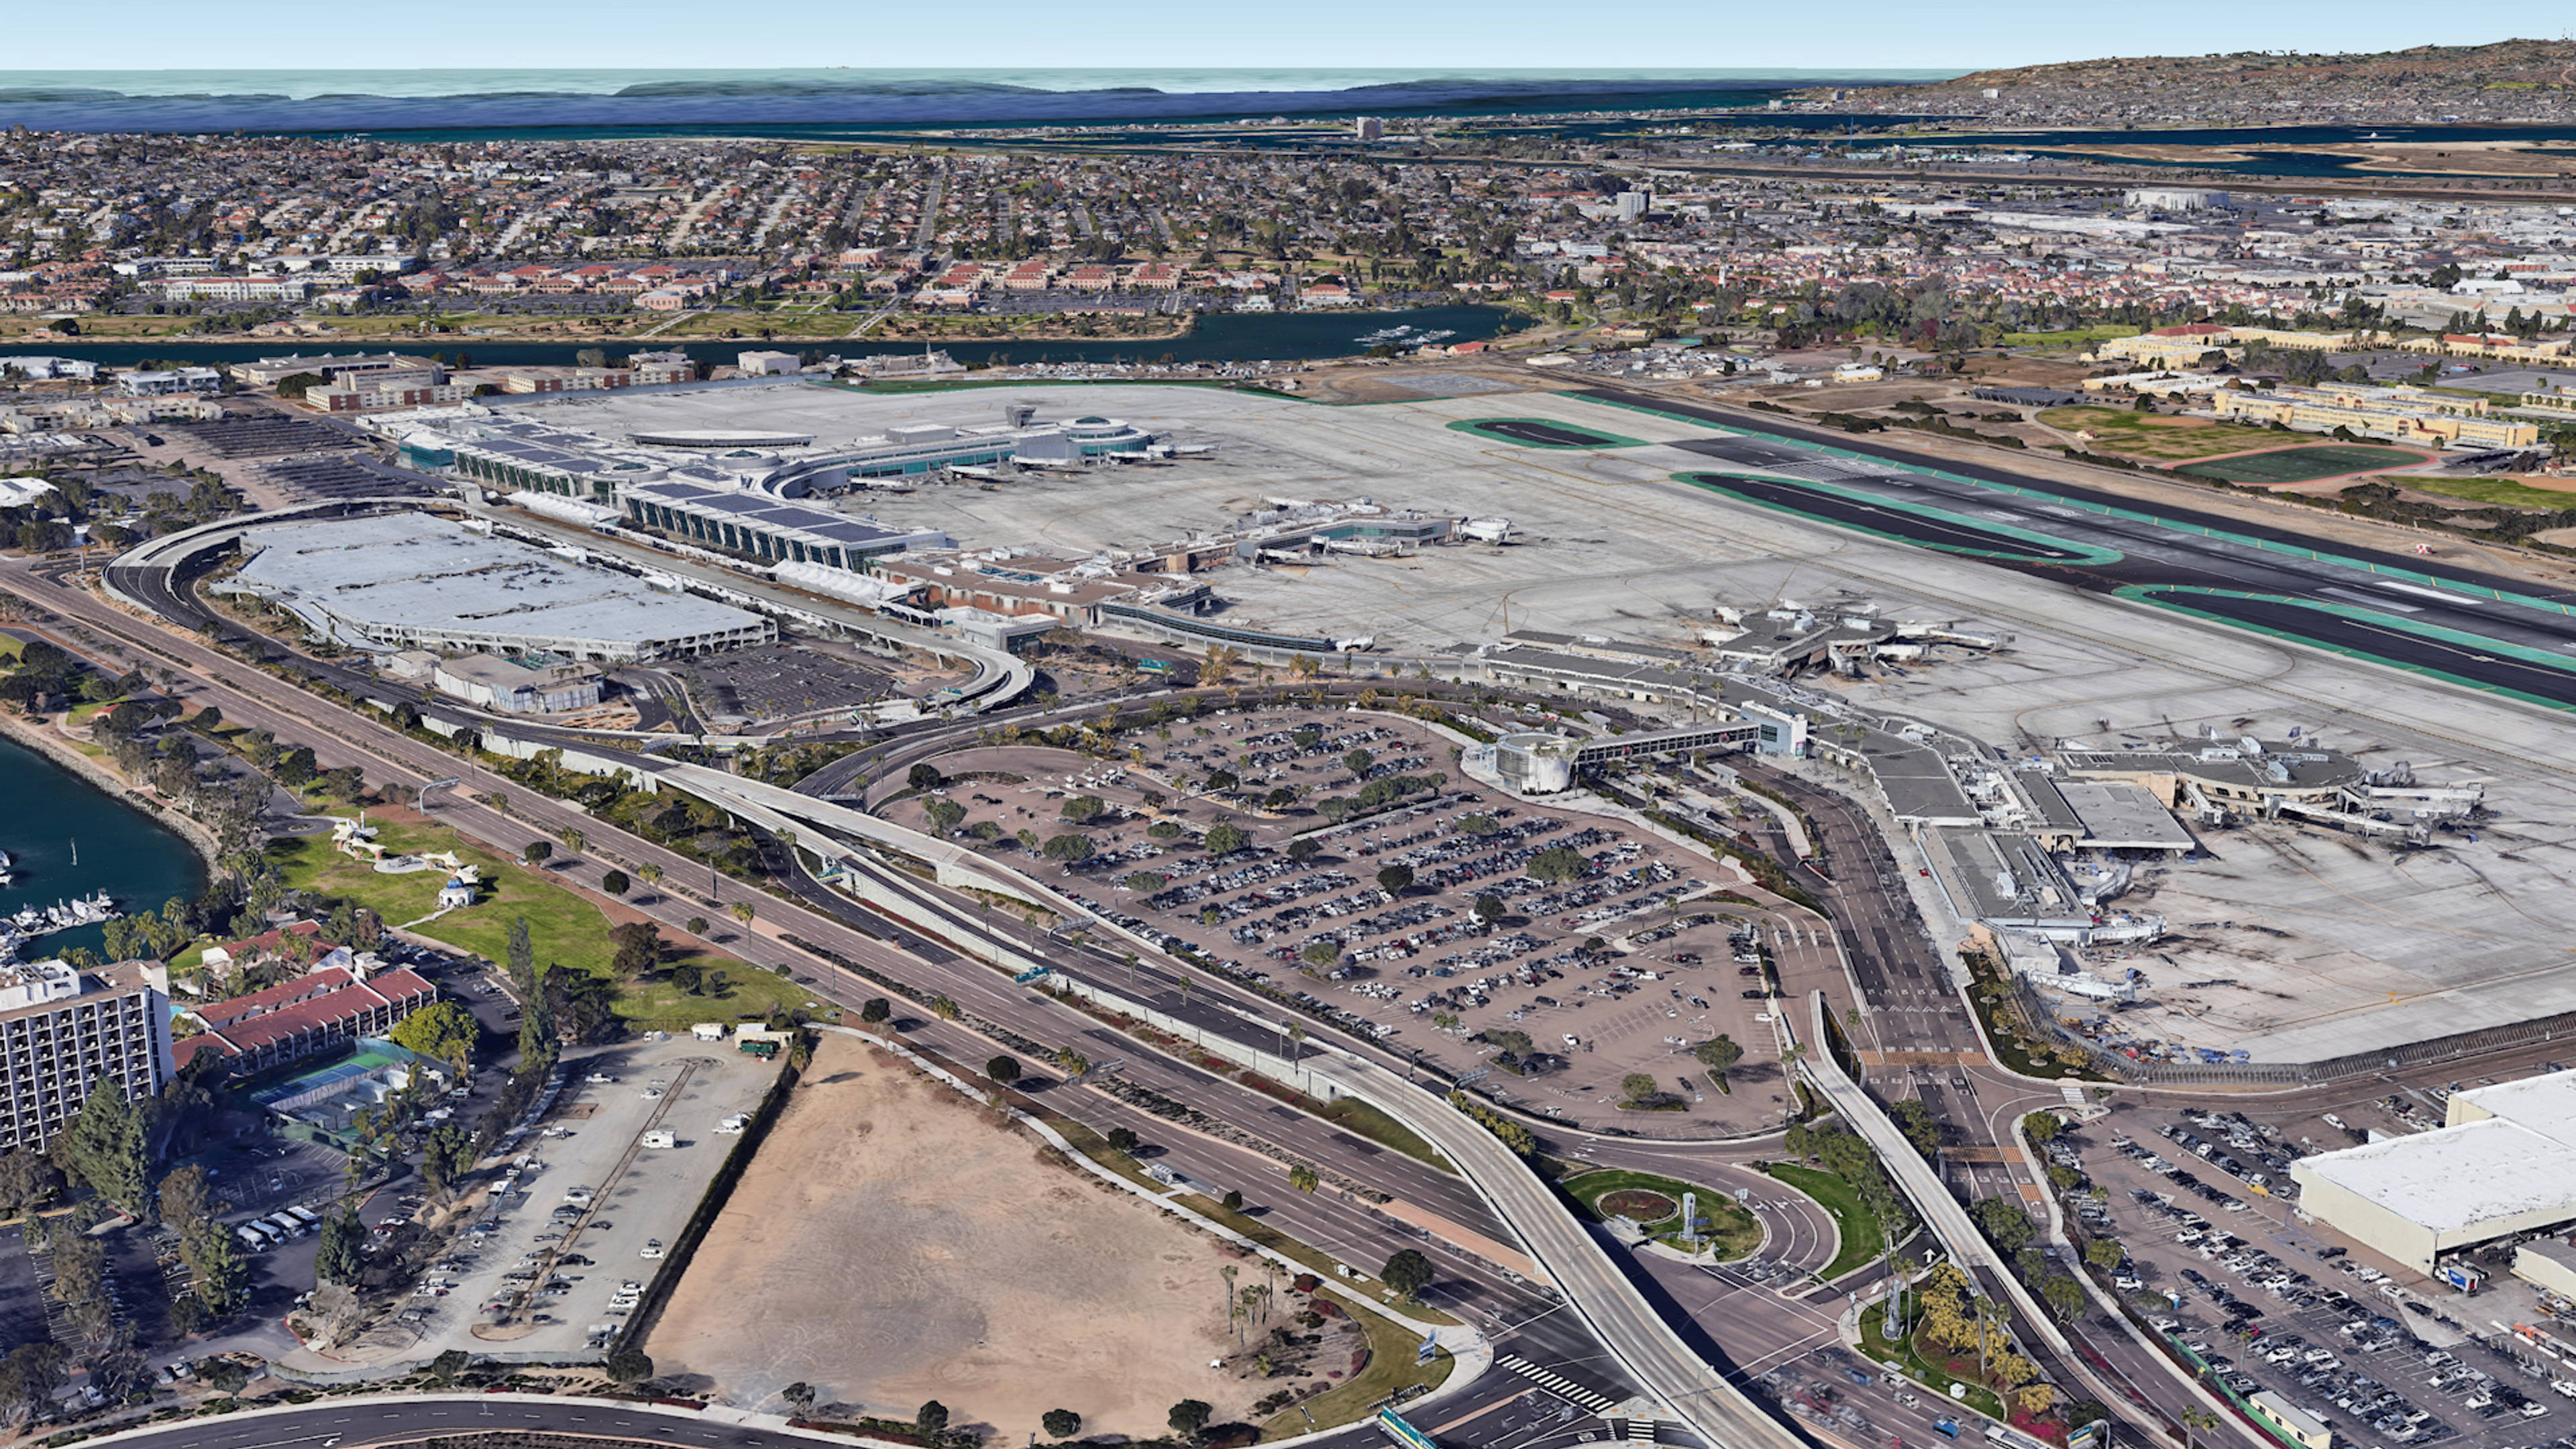  Aerial View of San Diego Airport Parking